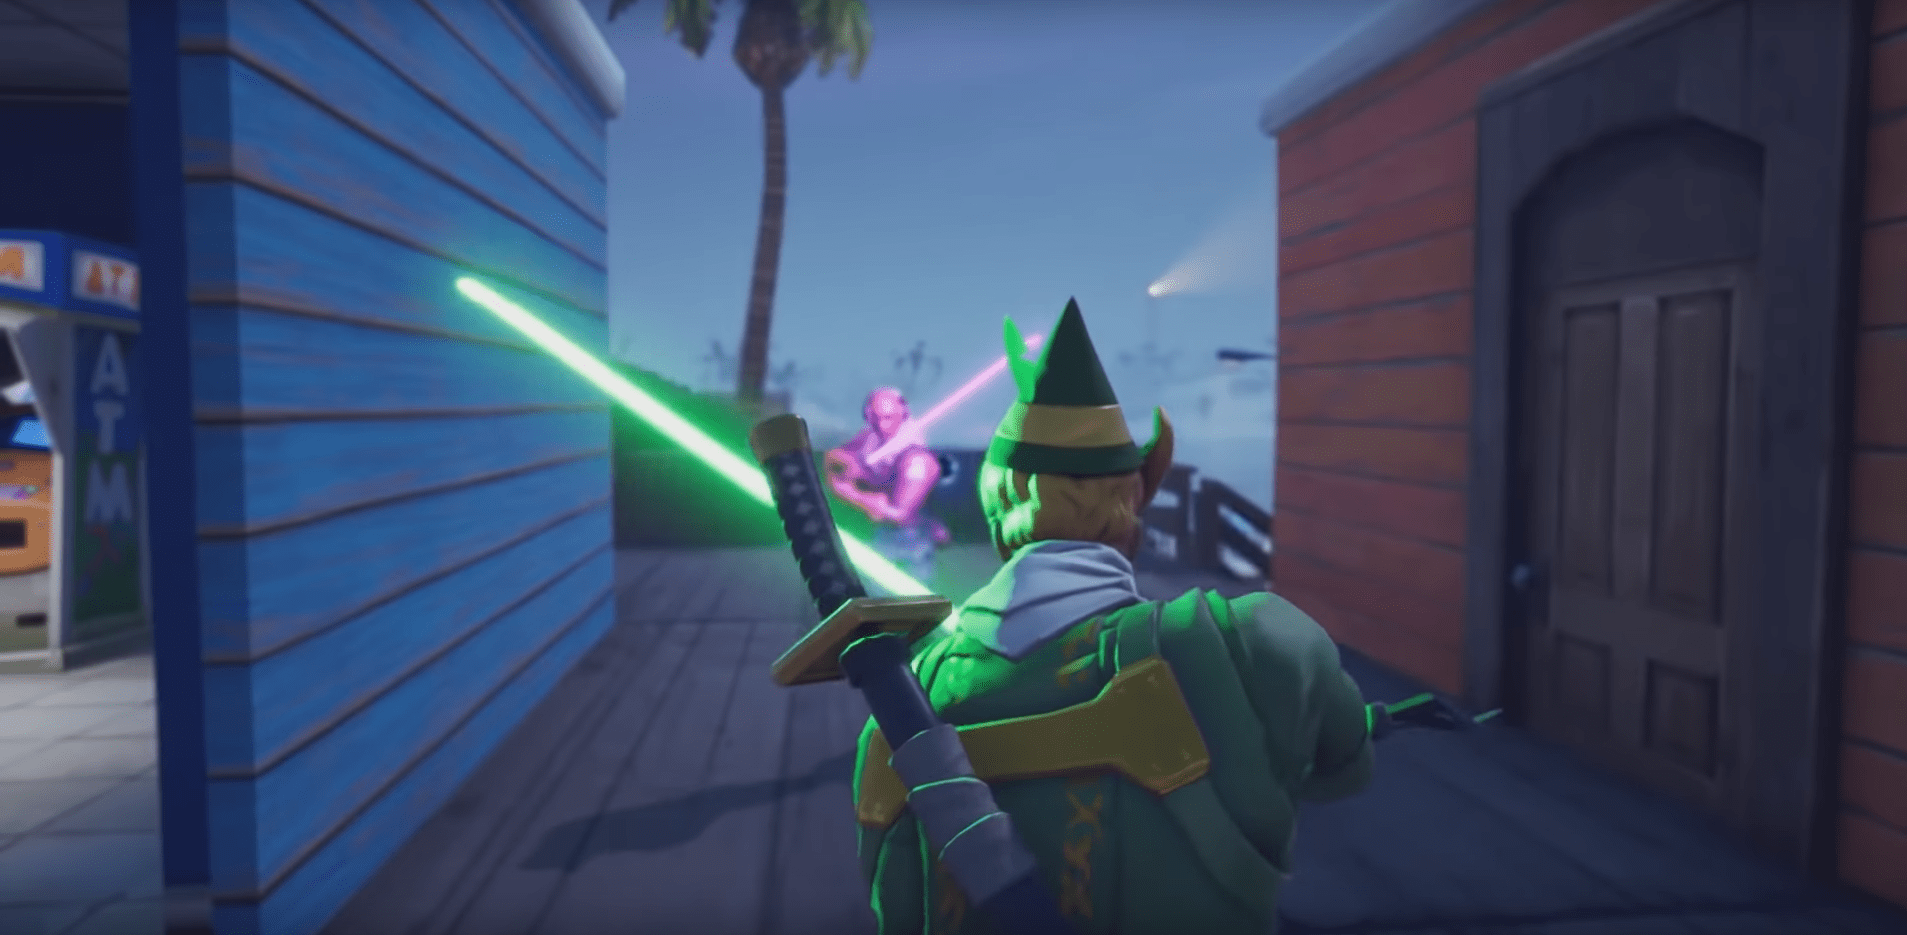 Fortnite’s Seasonal Mode The Spy Within Is Getting Riffed For Copying Among Us